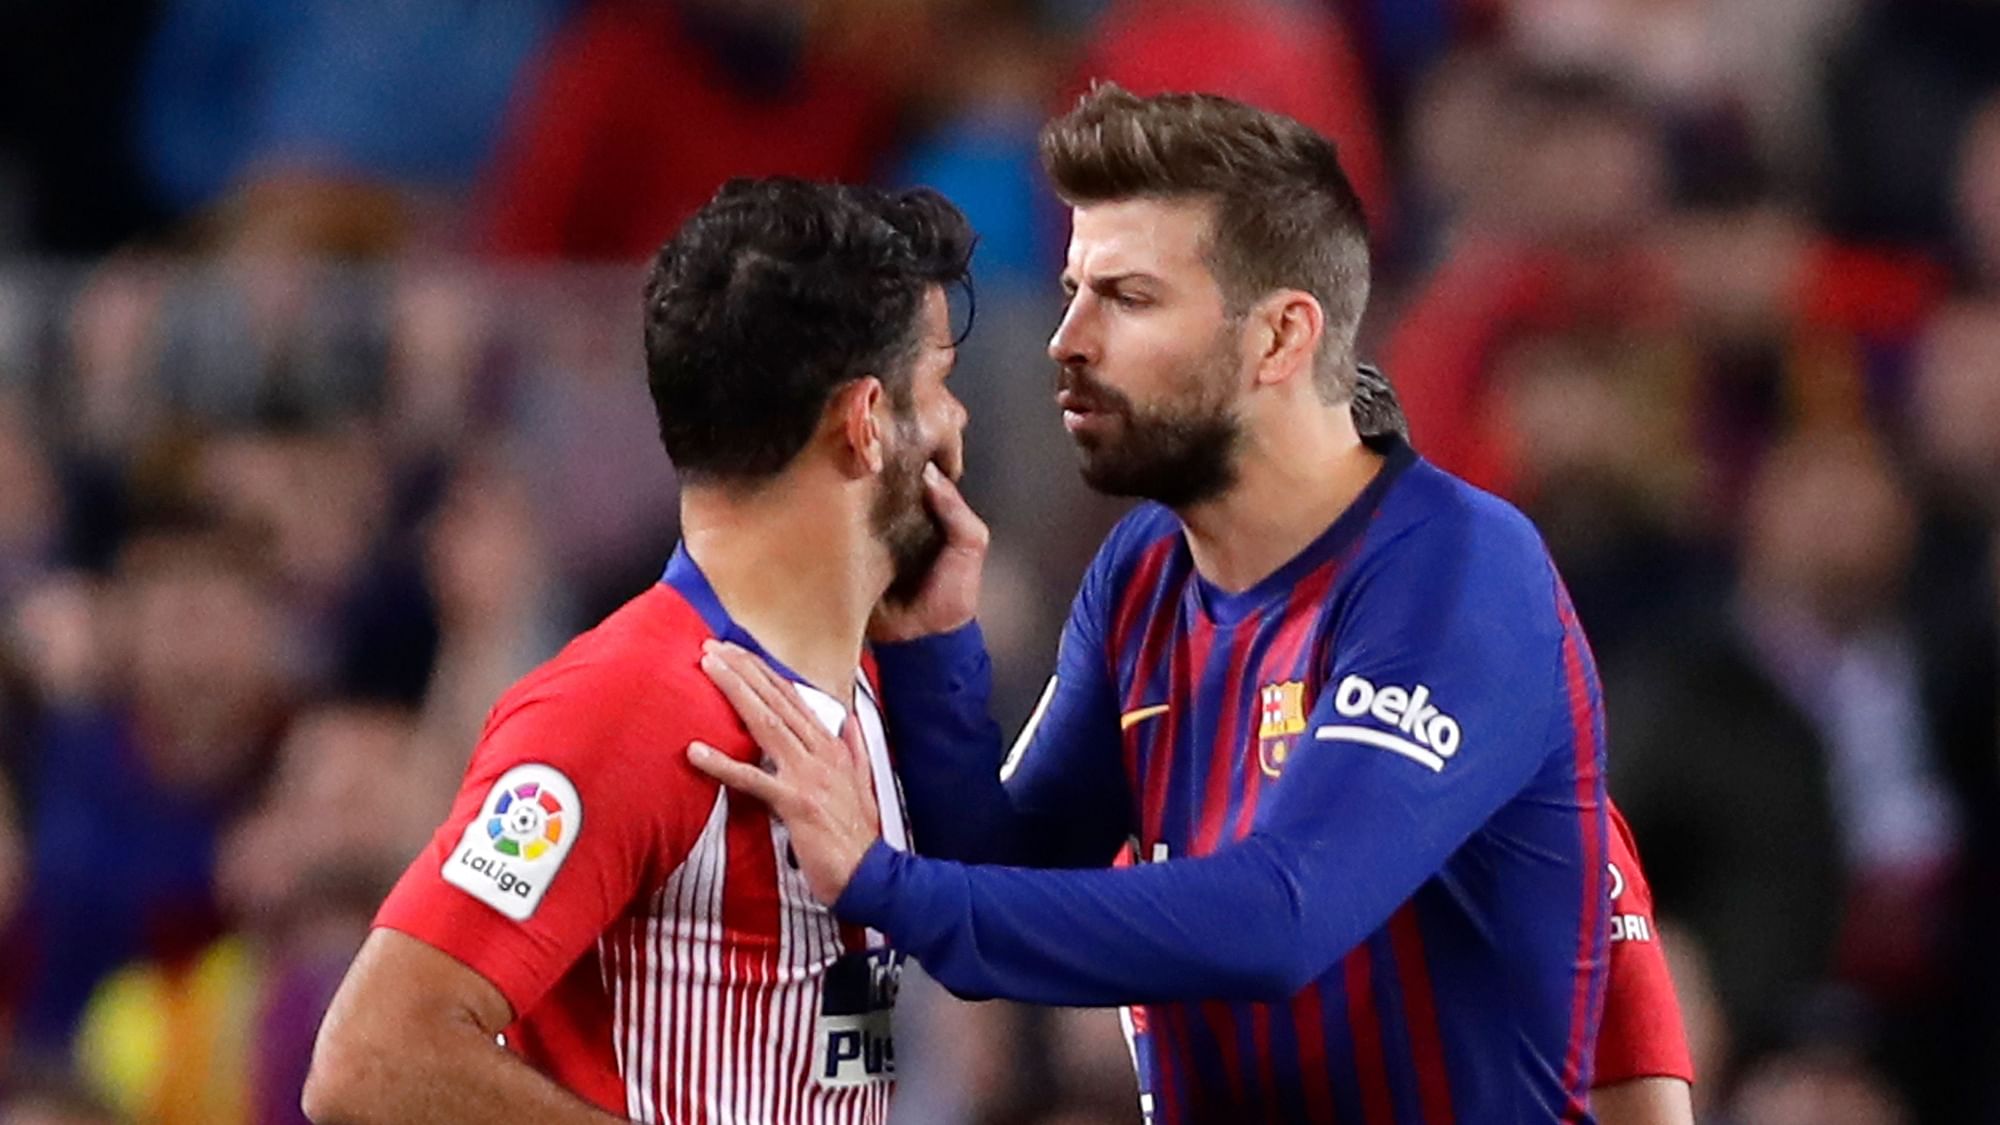 Barcelona’s Gerald Pique, right, talks to Atletico forward Diego Costa who was sent off with a red card for insulting referee Jesus Gil Manzano during a Spanish La Liga soccer.